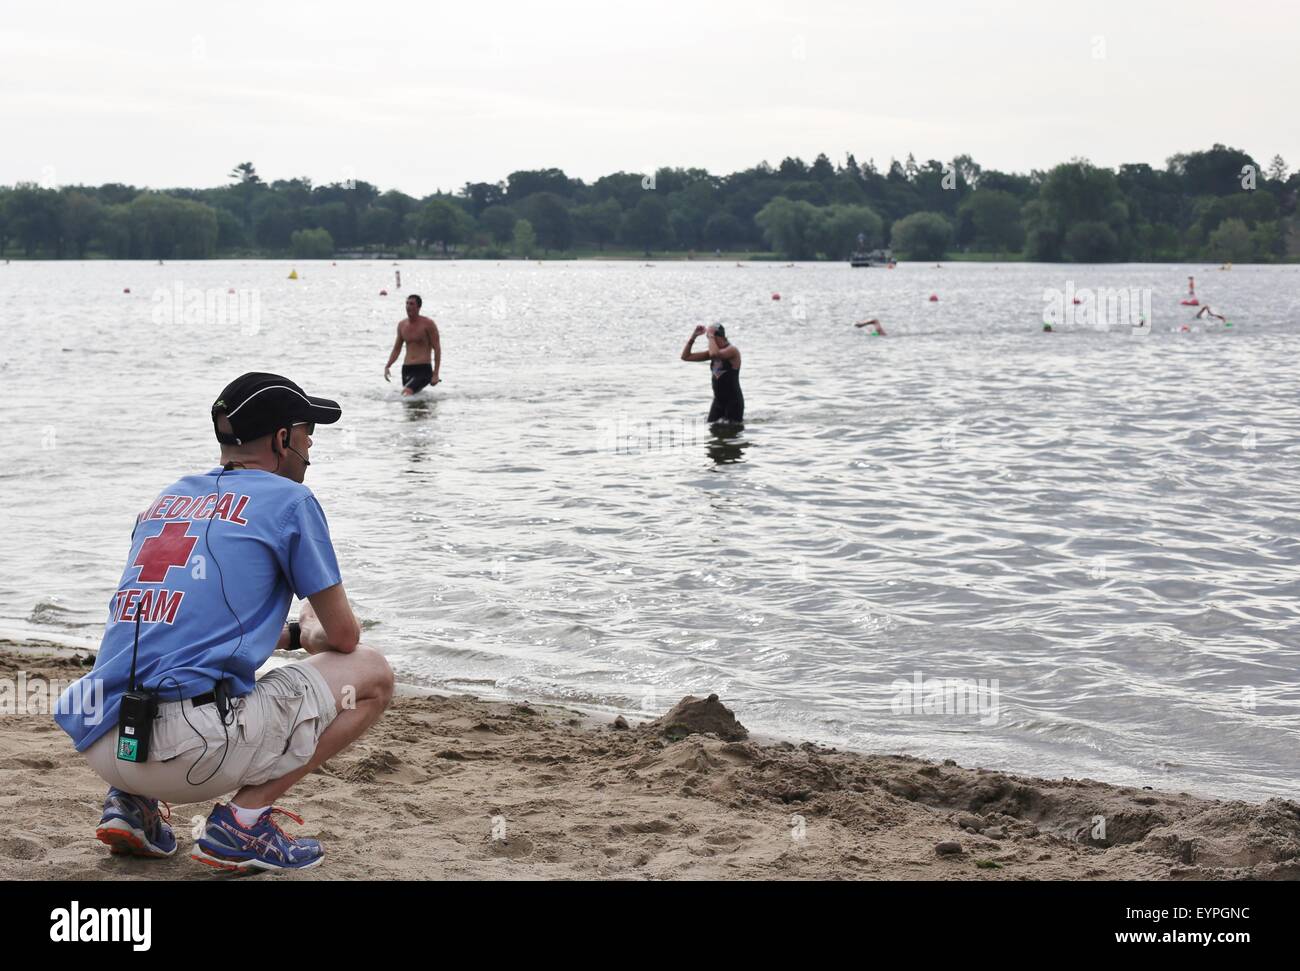 A member of the medical team watches swimmers at the Lifetime Fitness triathlon in Minneapolis. Stock Photo